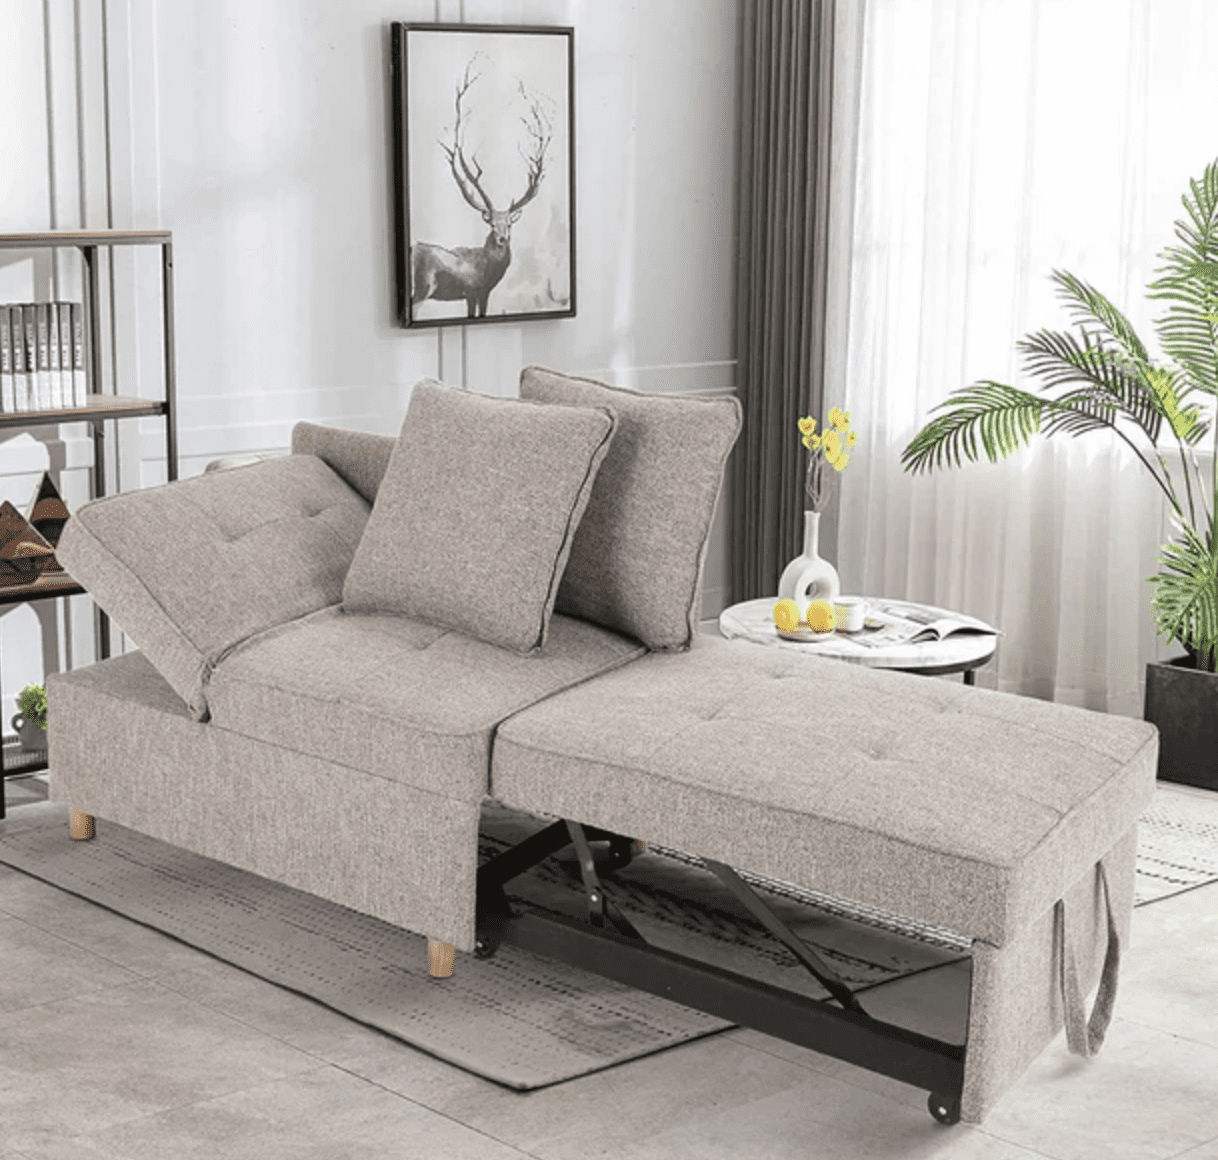 Walmart 4 In 1 Convertible Sofa: It'S Perfect For Small Spaces | Apartment  Therapy In 4 In 1 Convertible Sleeper Chair Beds (View 10 of 15)